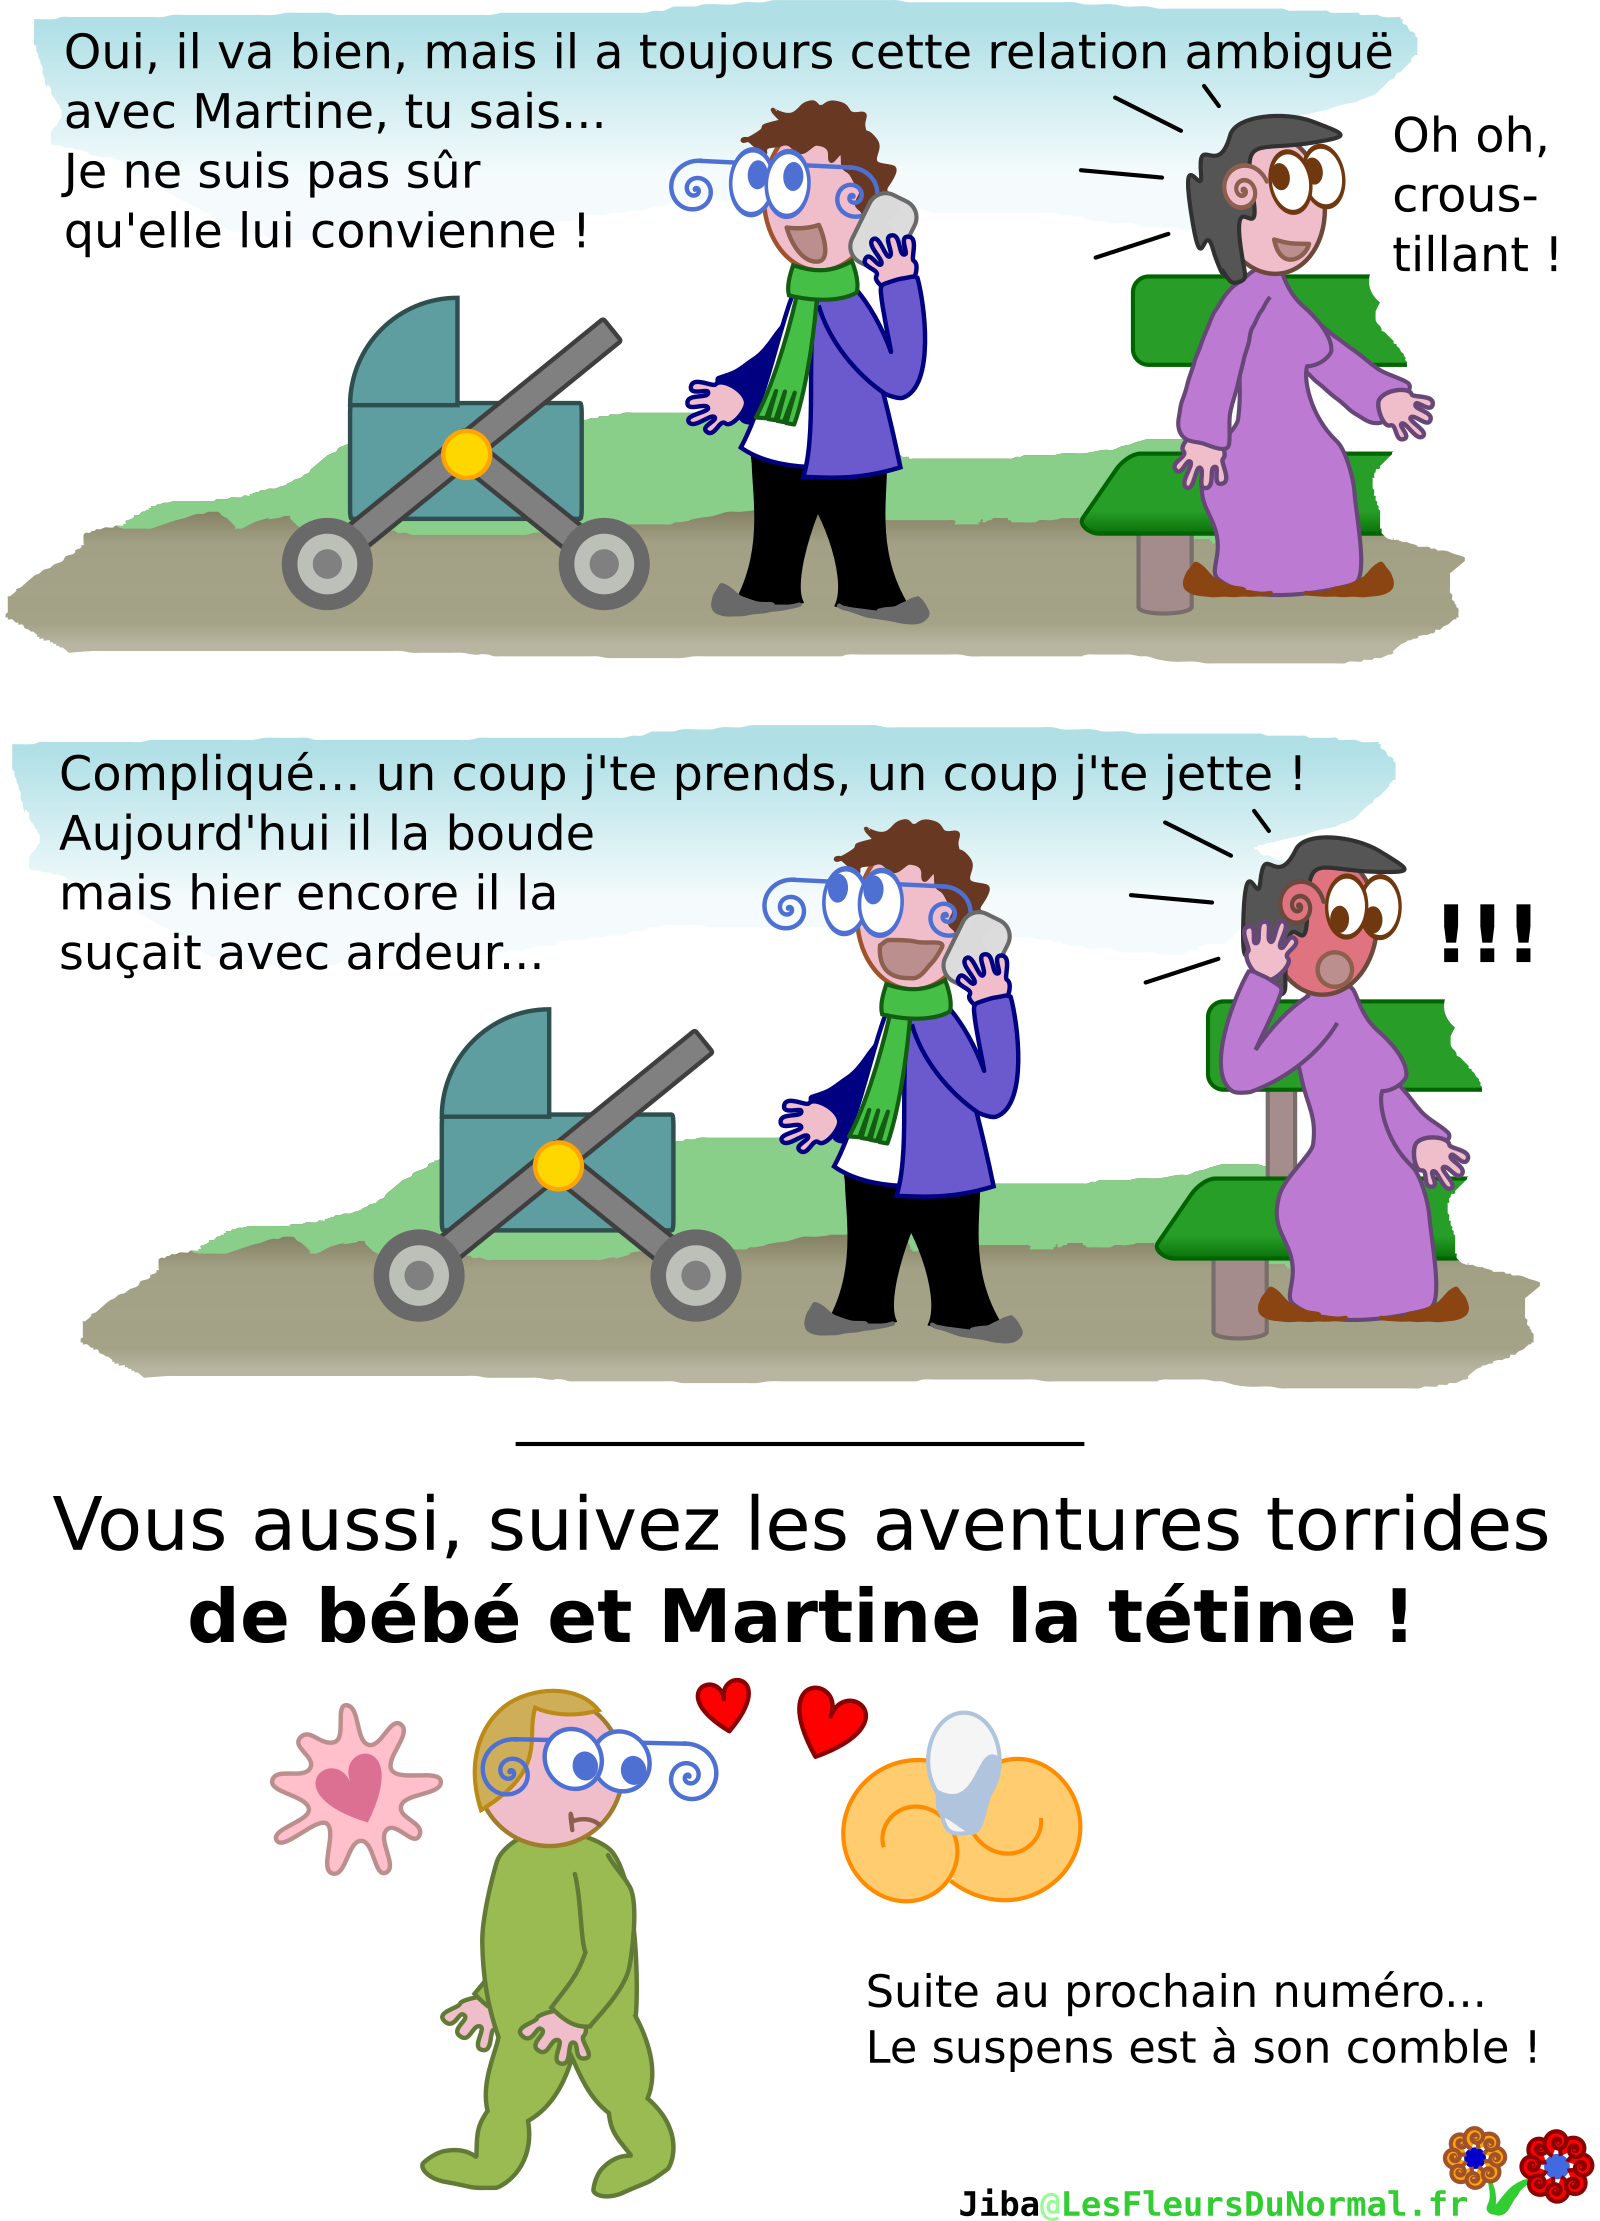 ../../_images/martine.png